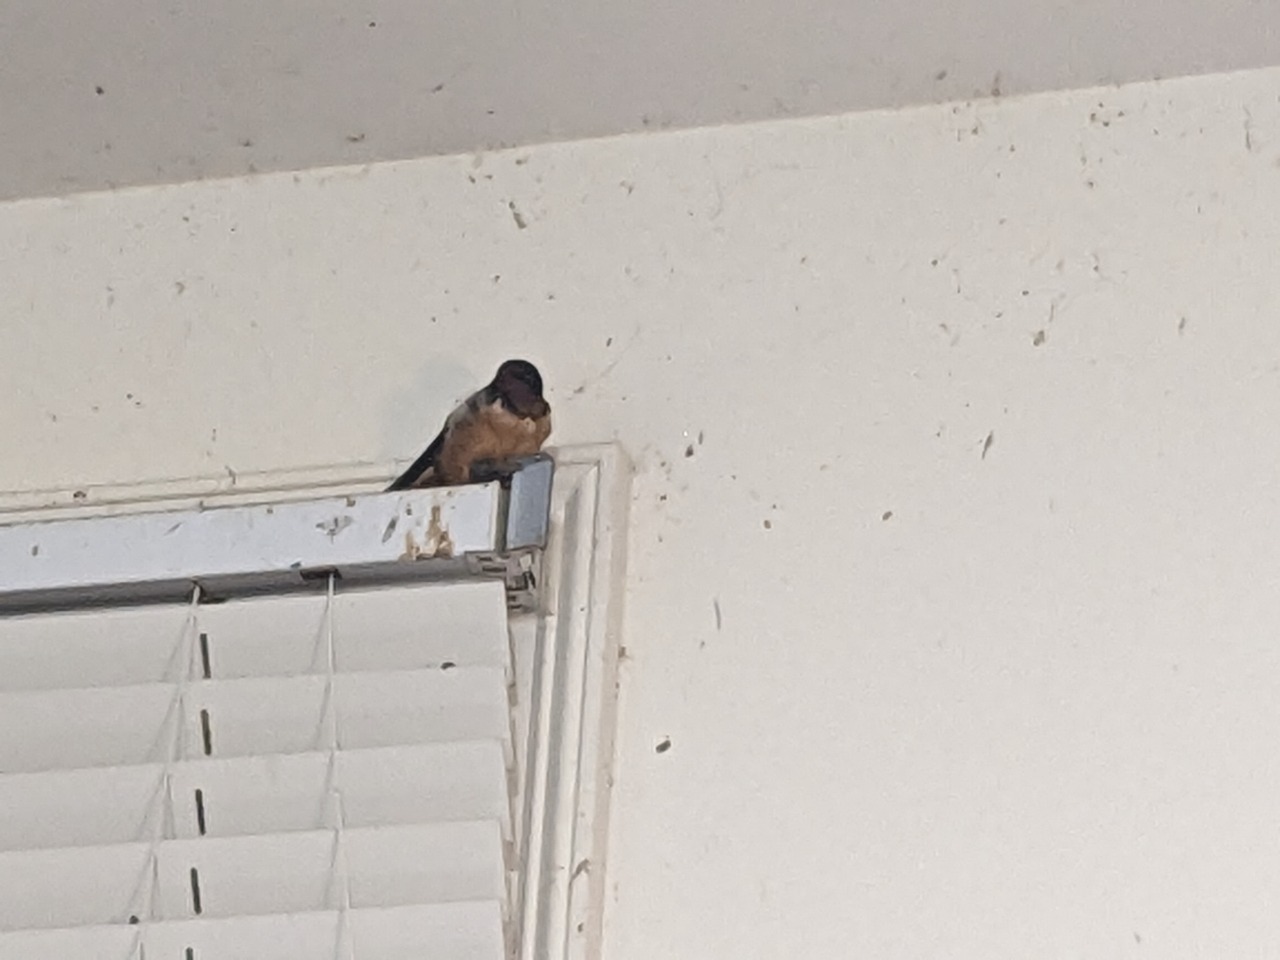 Barn Swallow perched on window ledge